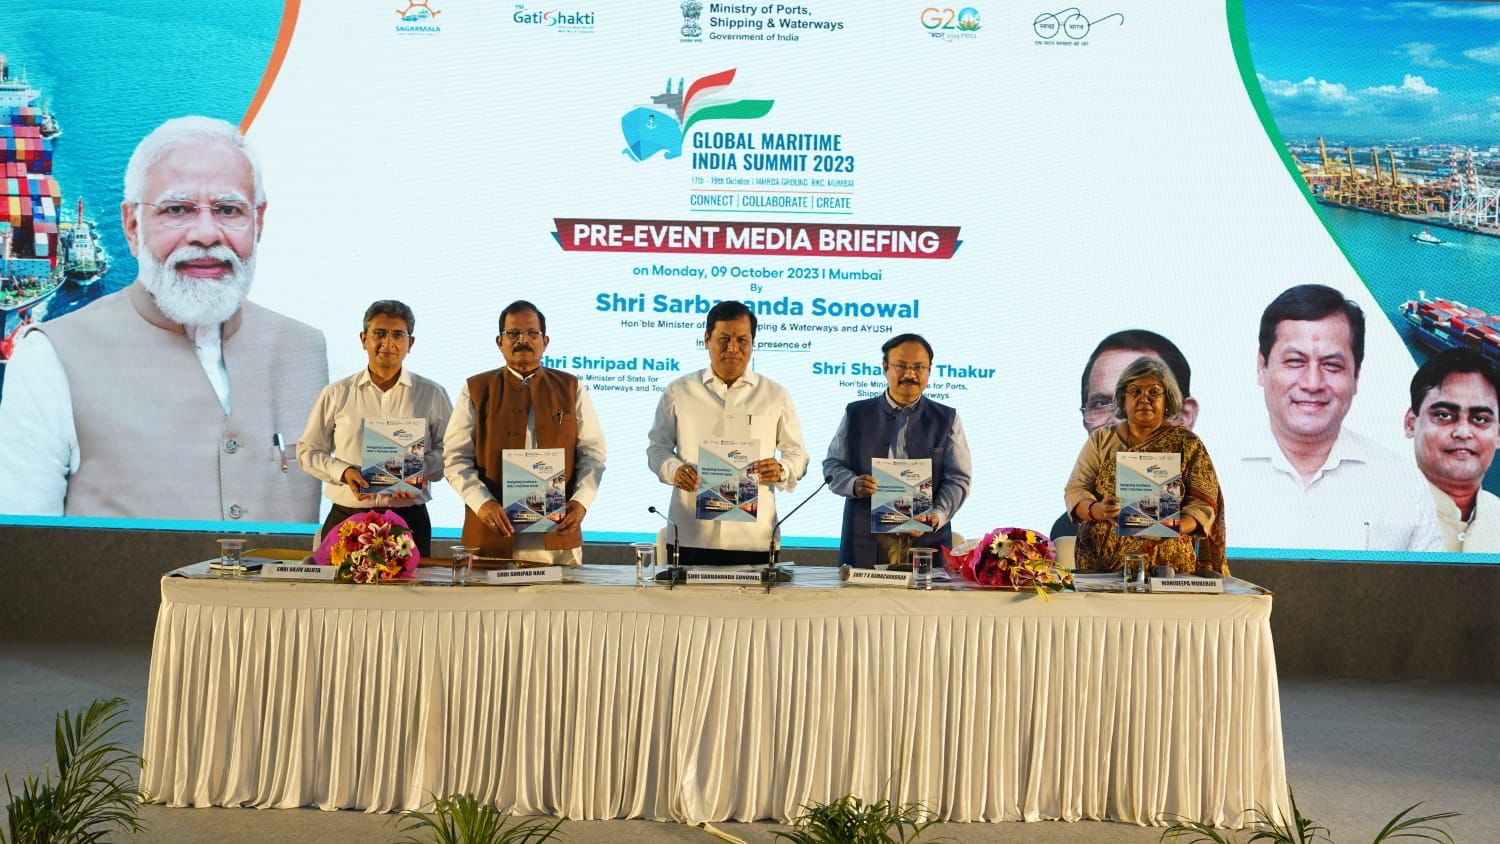 Union Minister Sarbananda Sonowal expects ₹10 trillion investments at the  Global Maritime India Summit, 2023 - NE India Broadcast